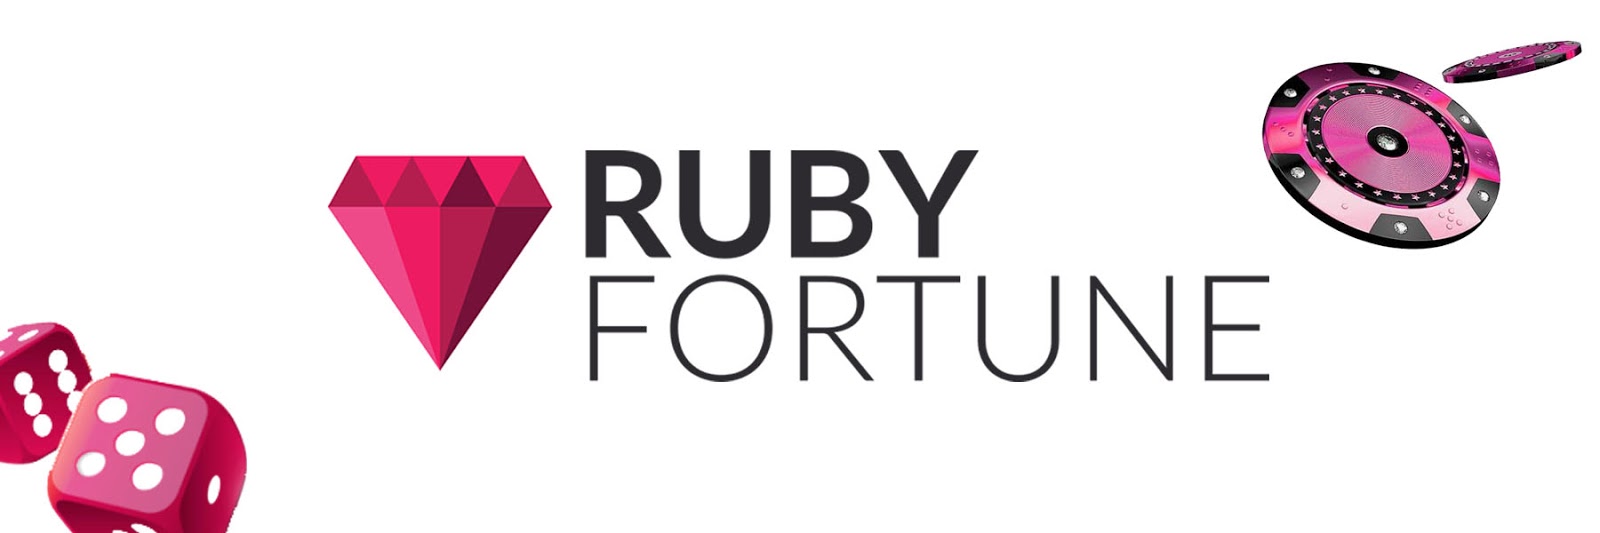 Ruby Fortune Ontario